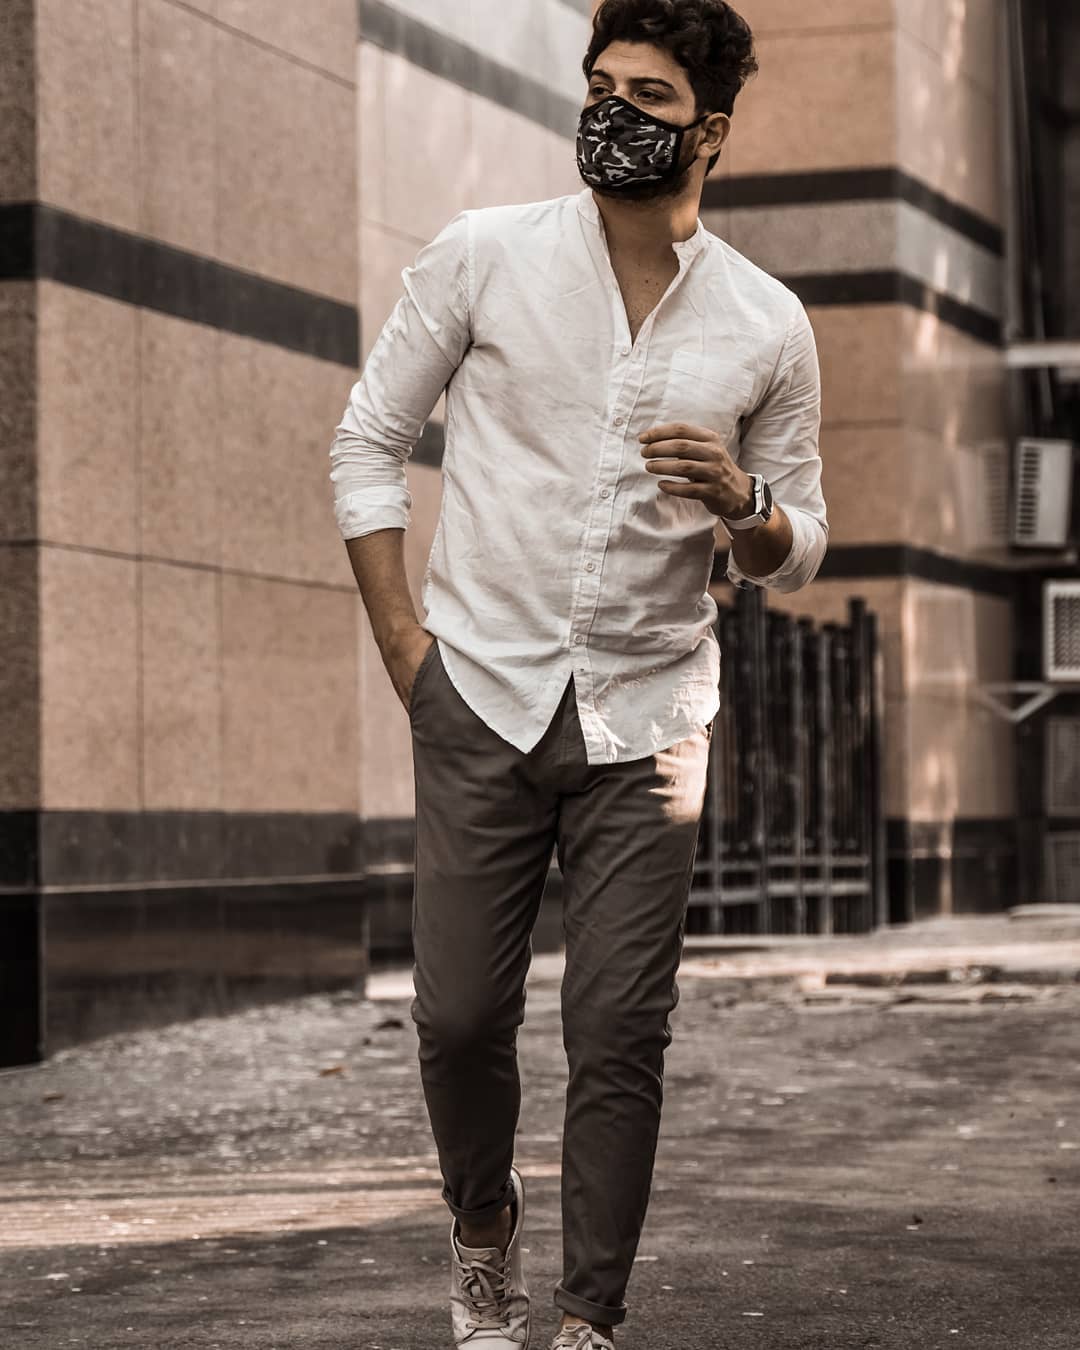 MYNTRA - Stepping into the new normal, in style. BTW, linen shirts are always ❤ right? 📸 @socialjacket
Look up style code: 11819520 (mask) / 2119007 (chinos) / 11097178 (sneakers) / 11475244 (shirt)
F...